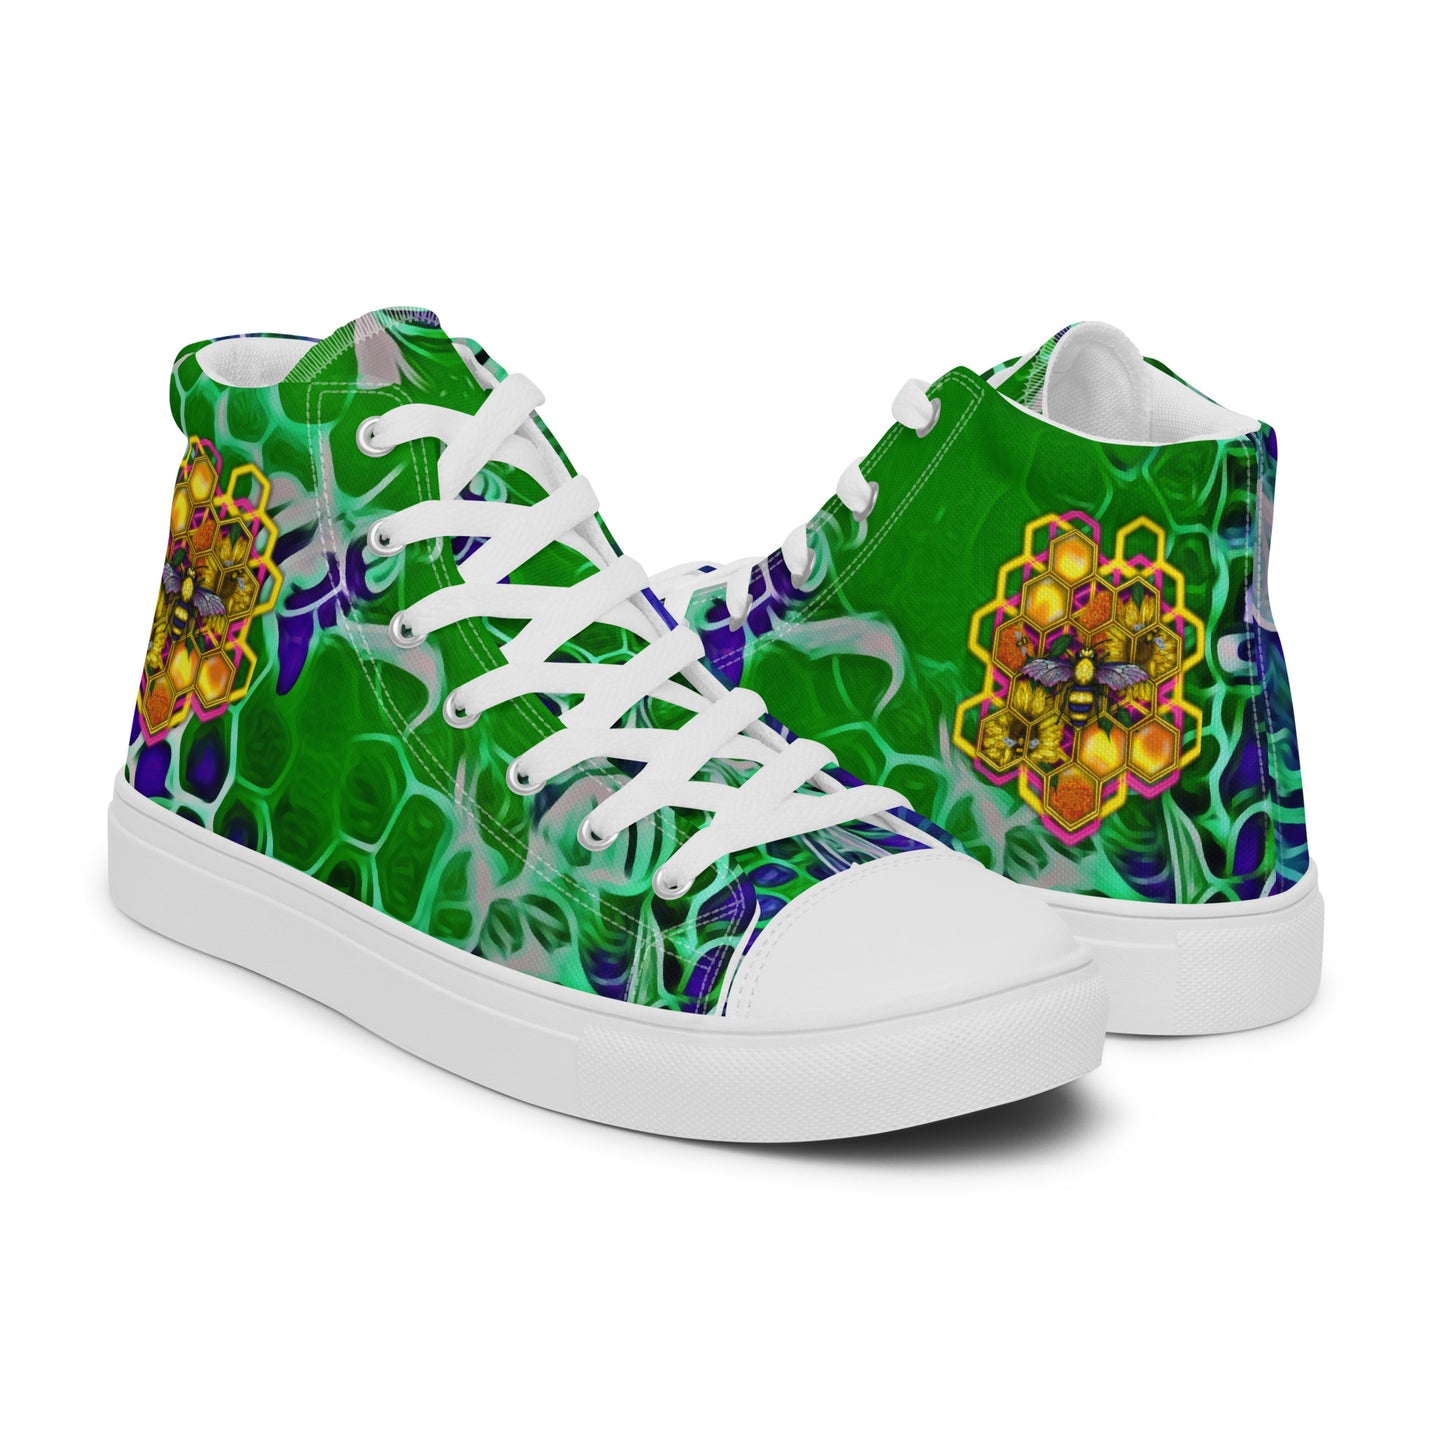 BEEHIVE (Electric Forest Exclusive Women’s High Top Canvas Shoes)